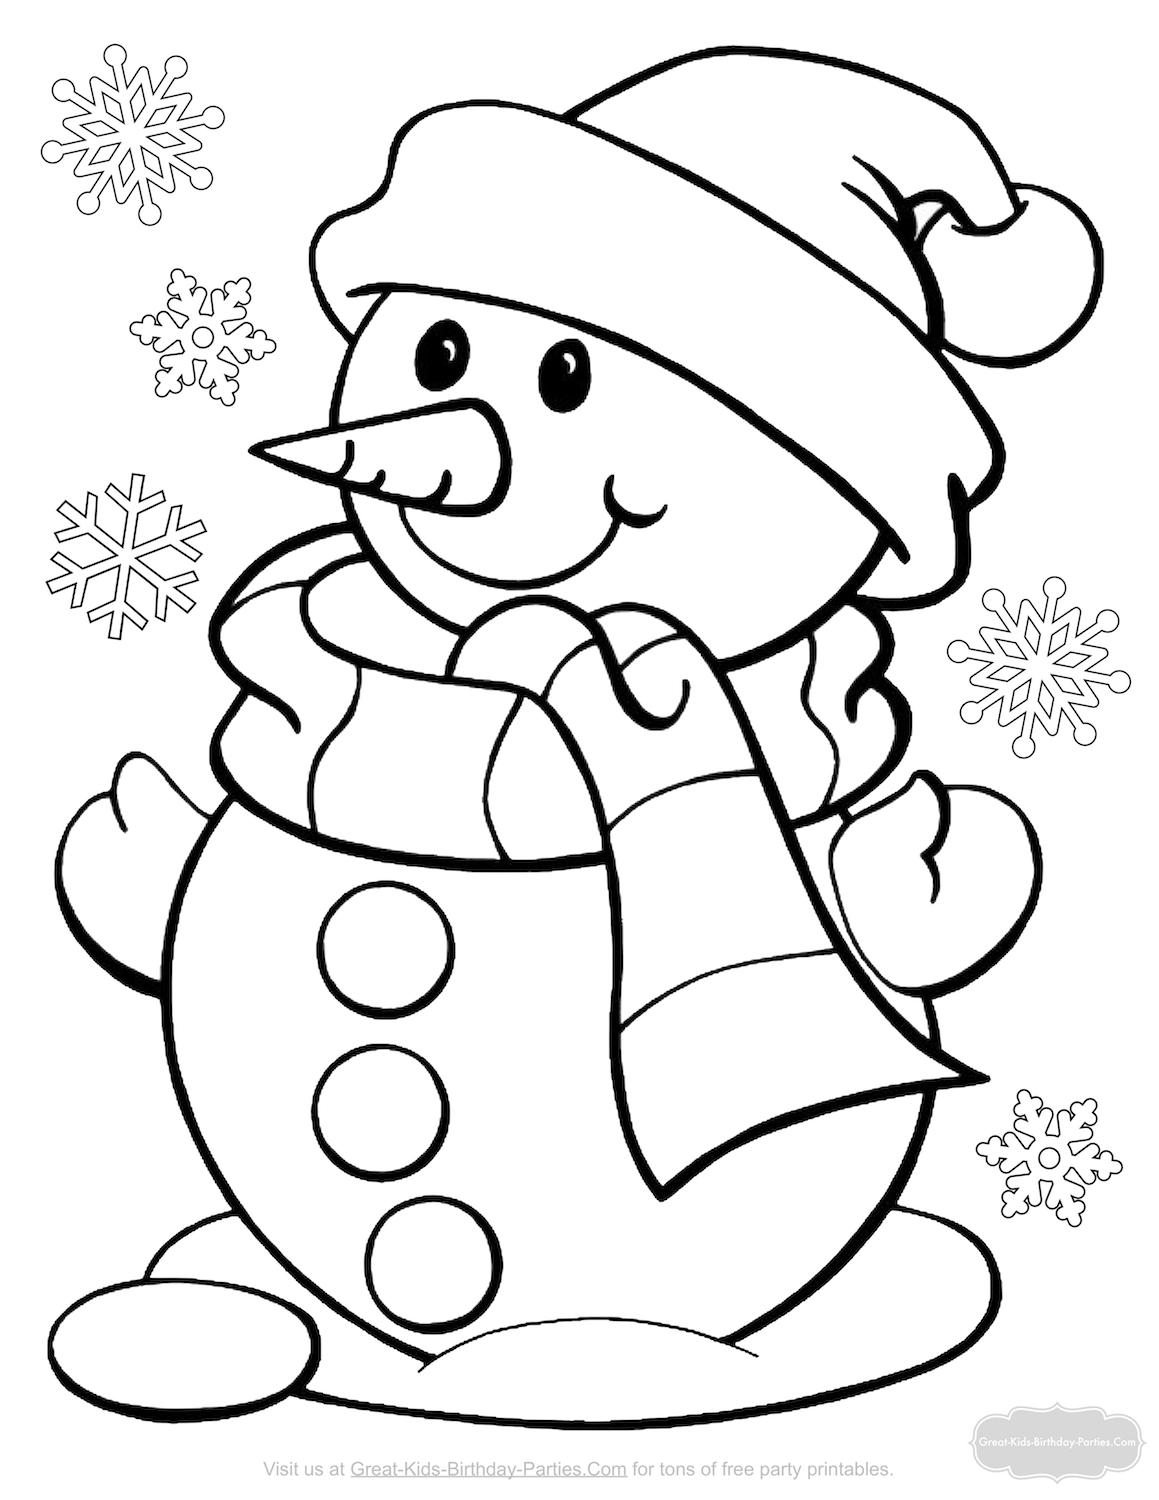 Christmas Coloring Pages | Snowman Coloring Pages, Christmas